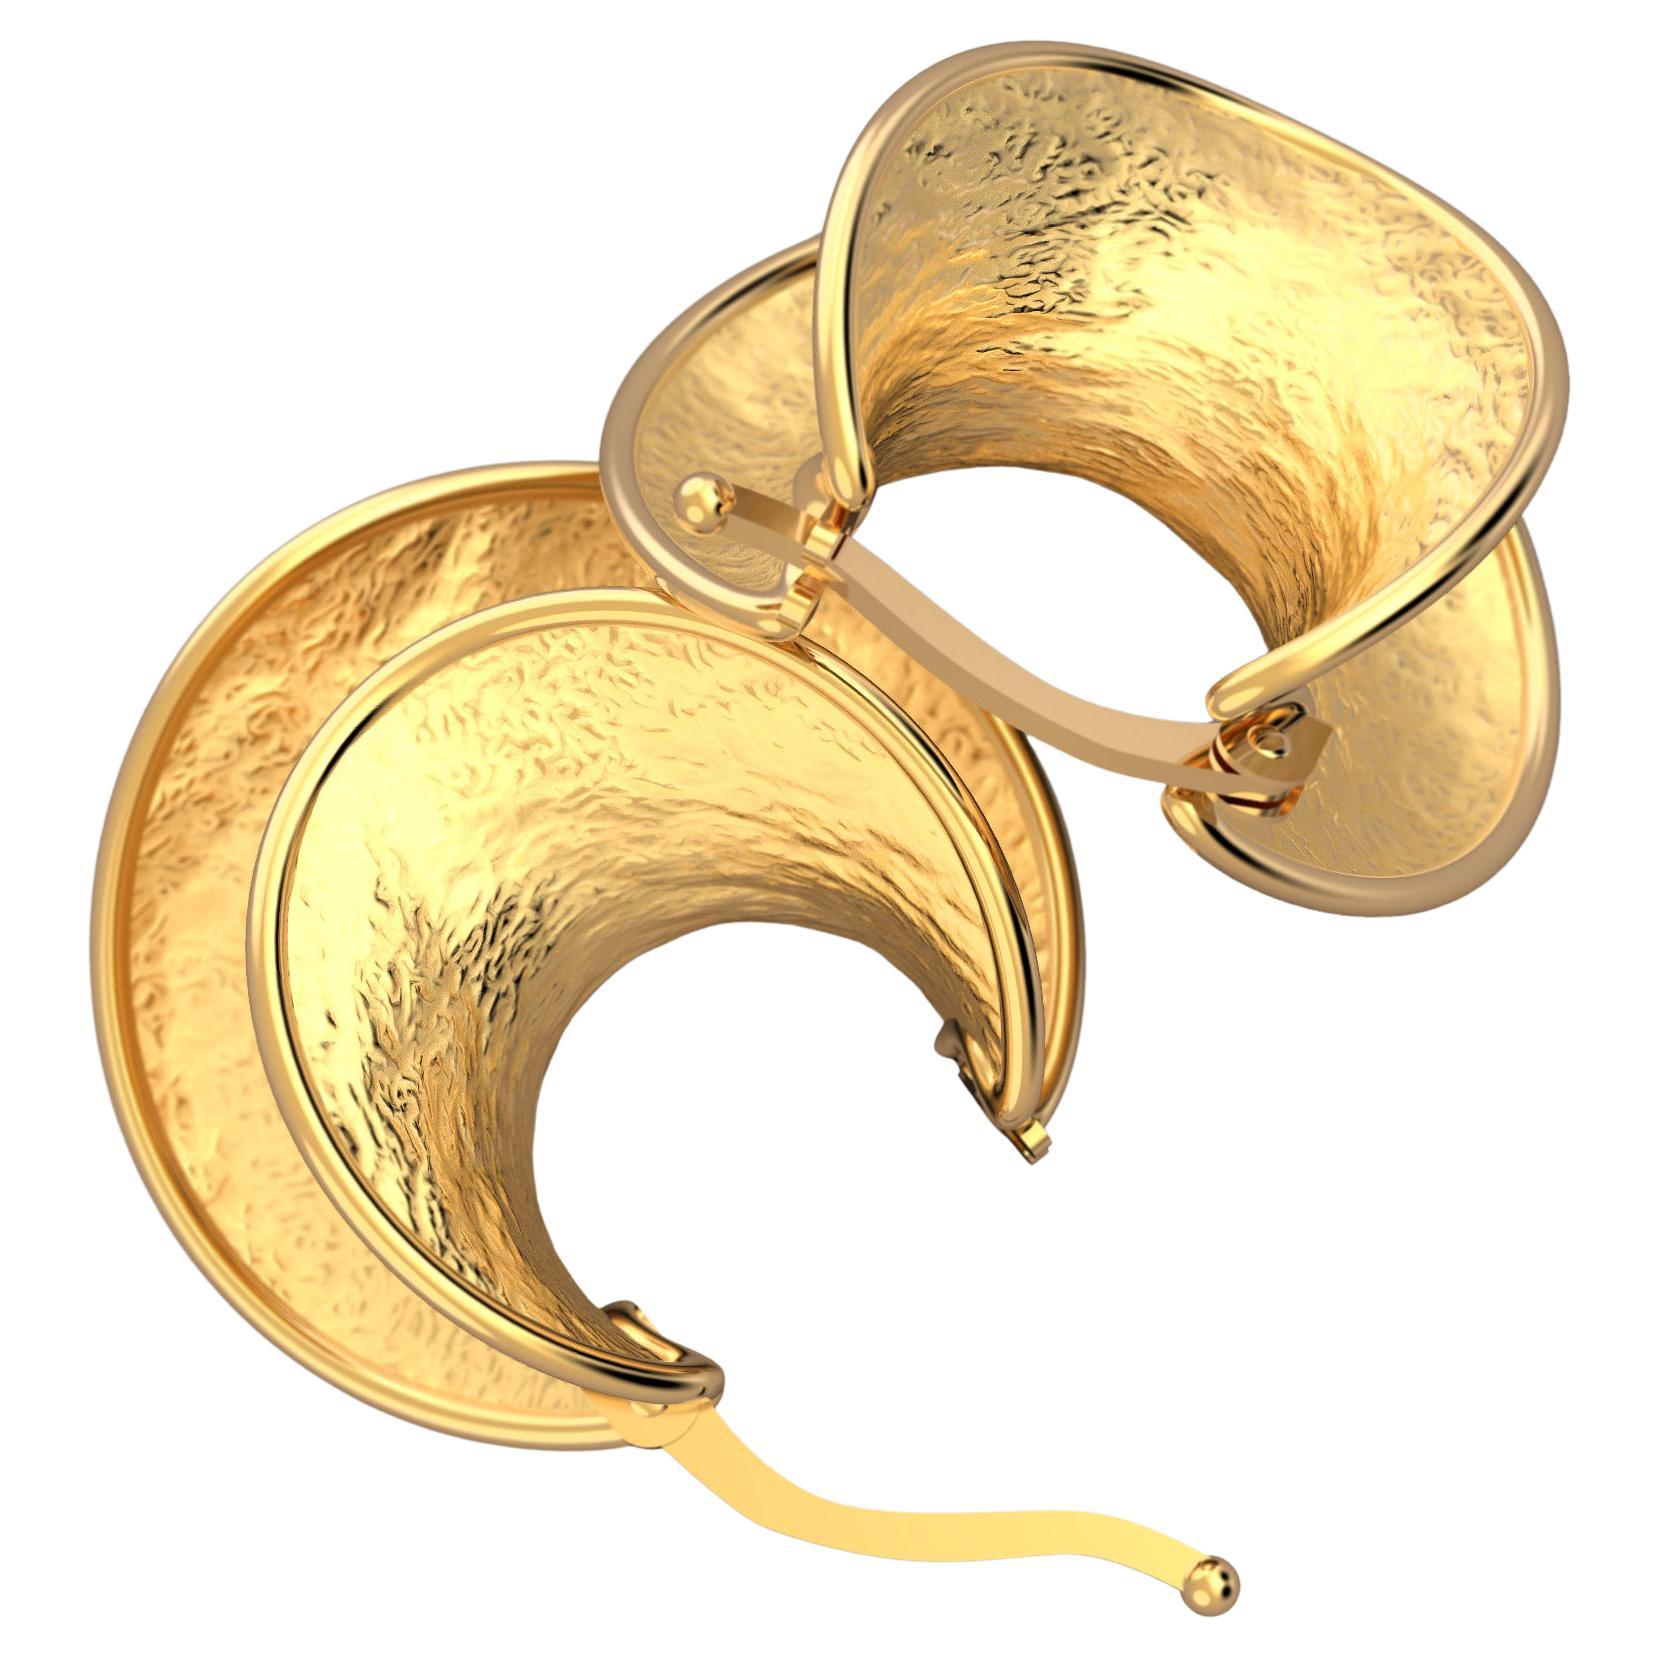 14k Solid Gold Hoop Earrings Made in Italy by Oltremare Gioielli